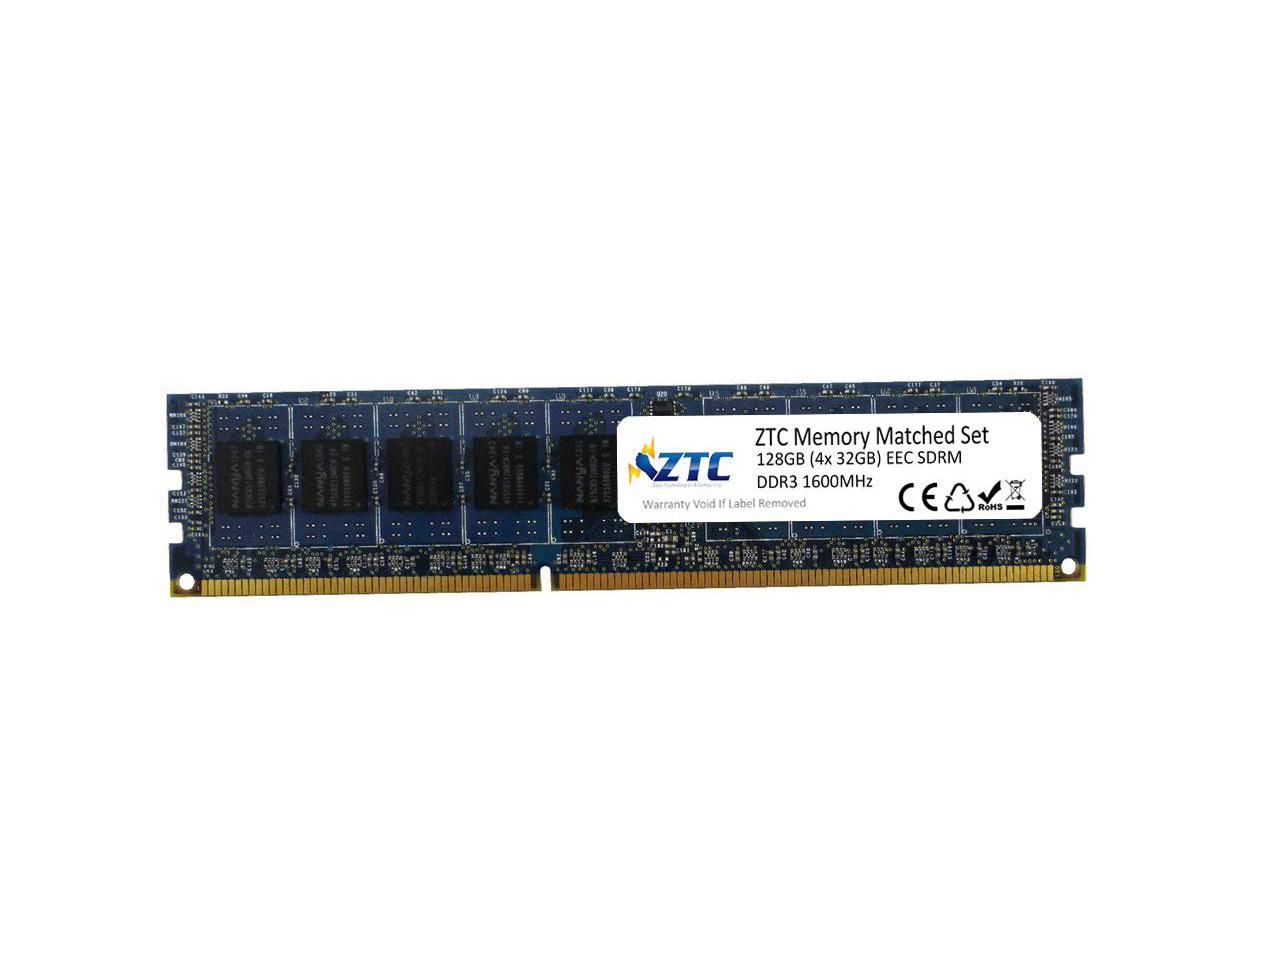 ZTC 128GB (4X 32GB) Matched Set PC3-10600 1333MHz DDR3 ECC-R SDRAM Modules for Mac Pro Late 2013. New, Lifetime Advance Replacement Limited Warranty Model ZTC1333D3Z3M128